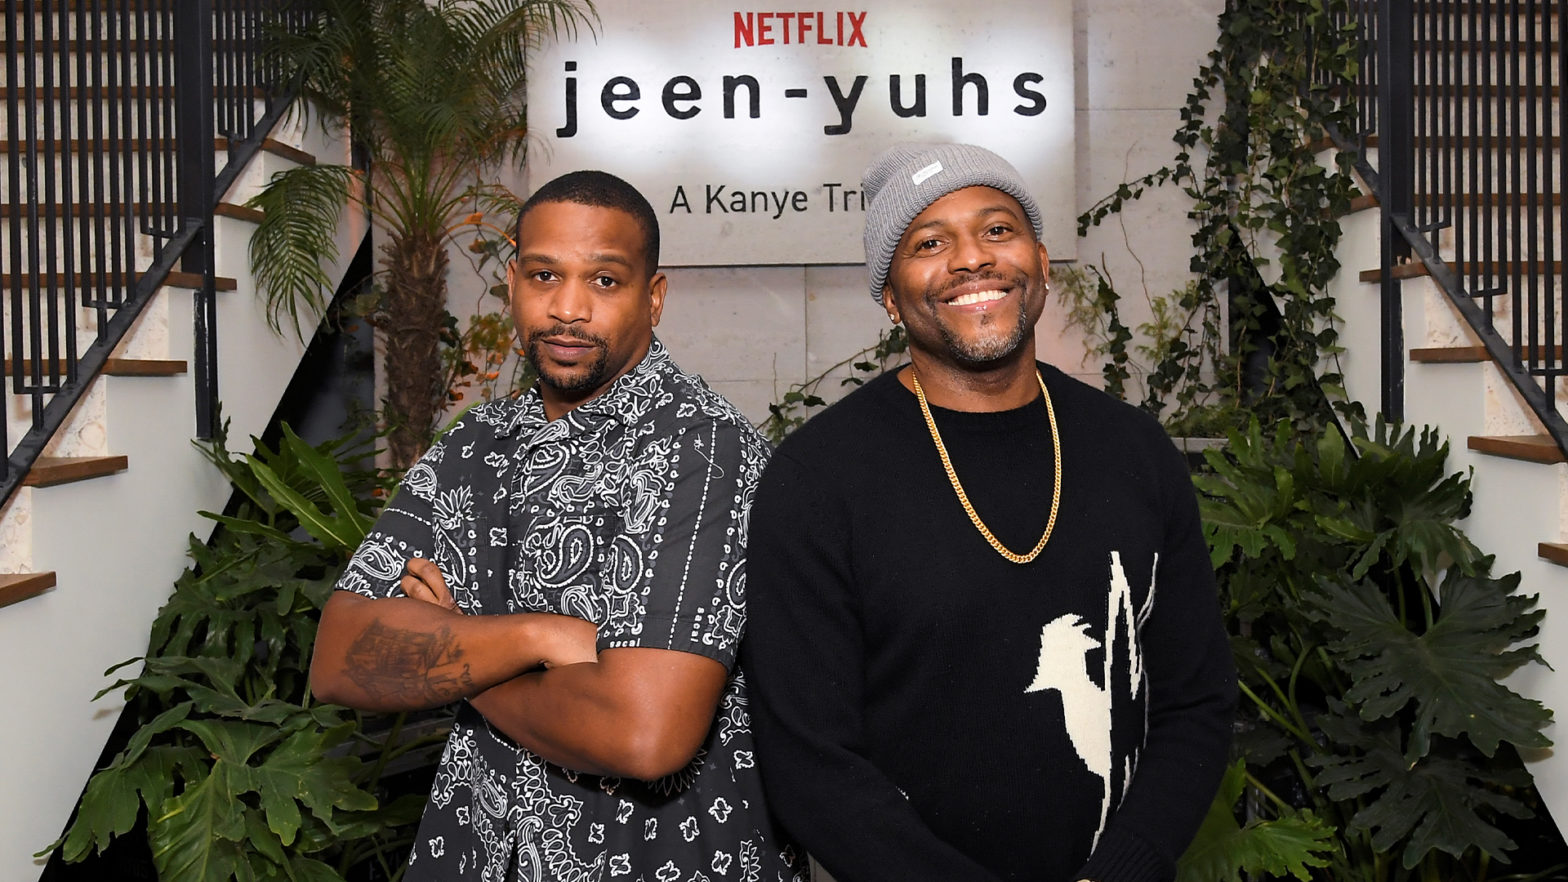 Coodie And Chike Took Over 20 Years To Make The Kanye West Doc — But Did Netflix Pay Them $30M?